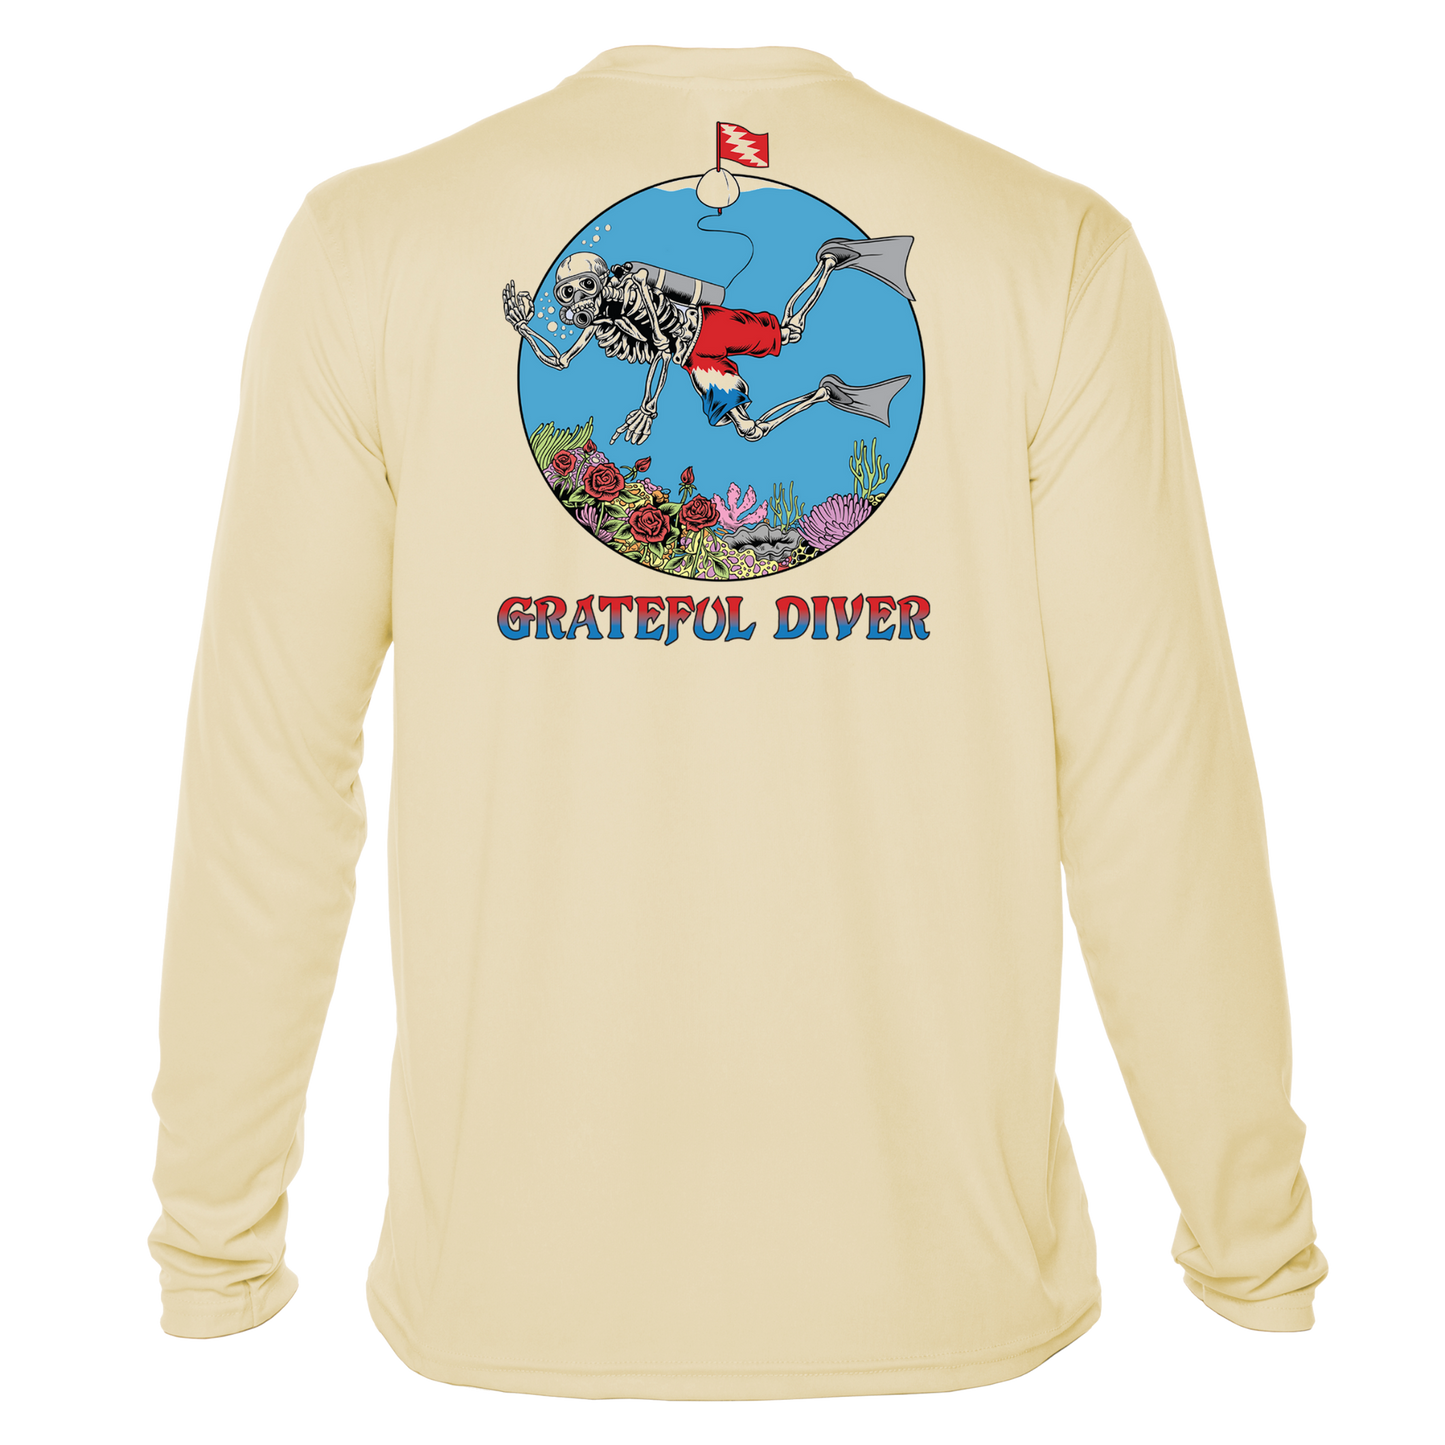 Grateful Diver Skeleton Diver UV Shirt in pale yellow showing the back off figure